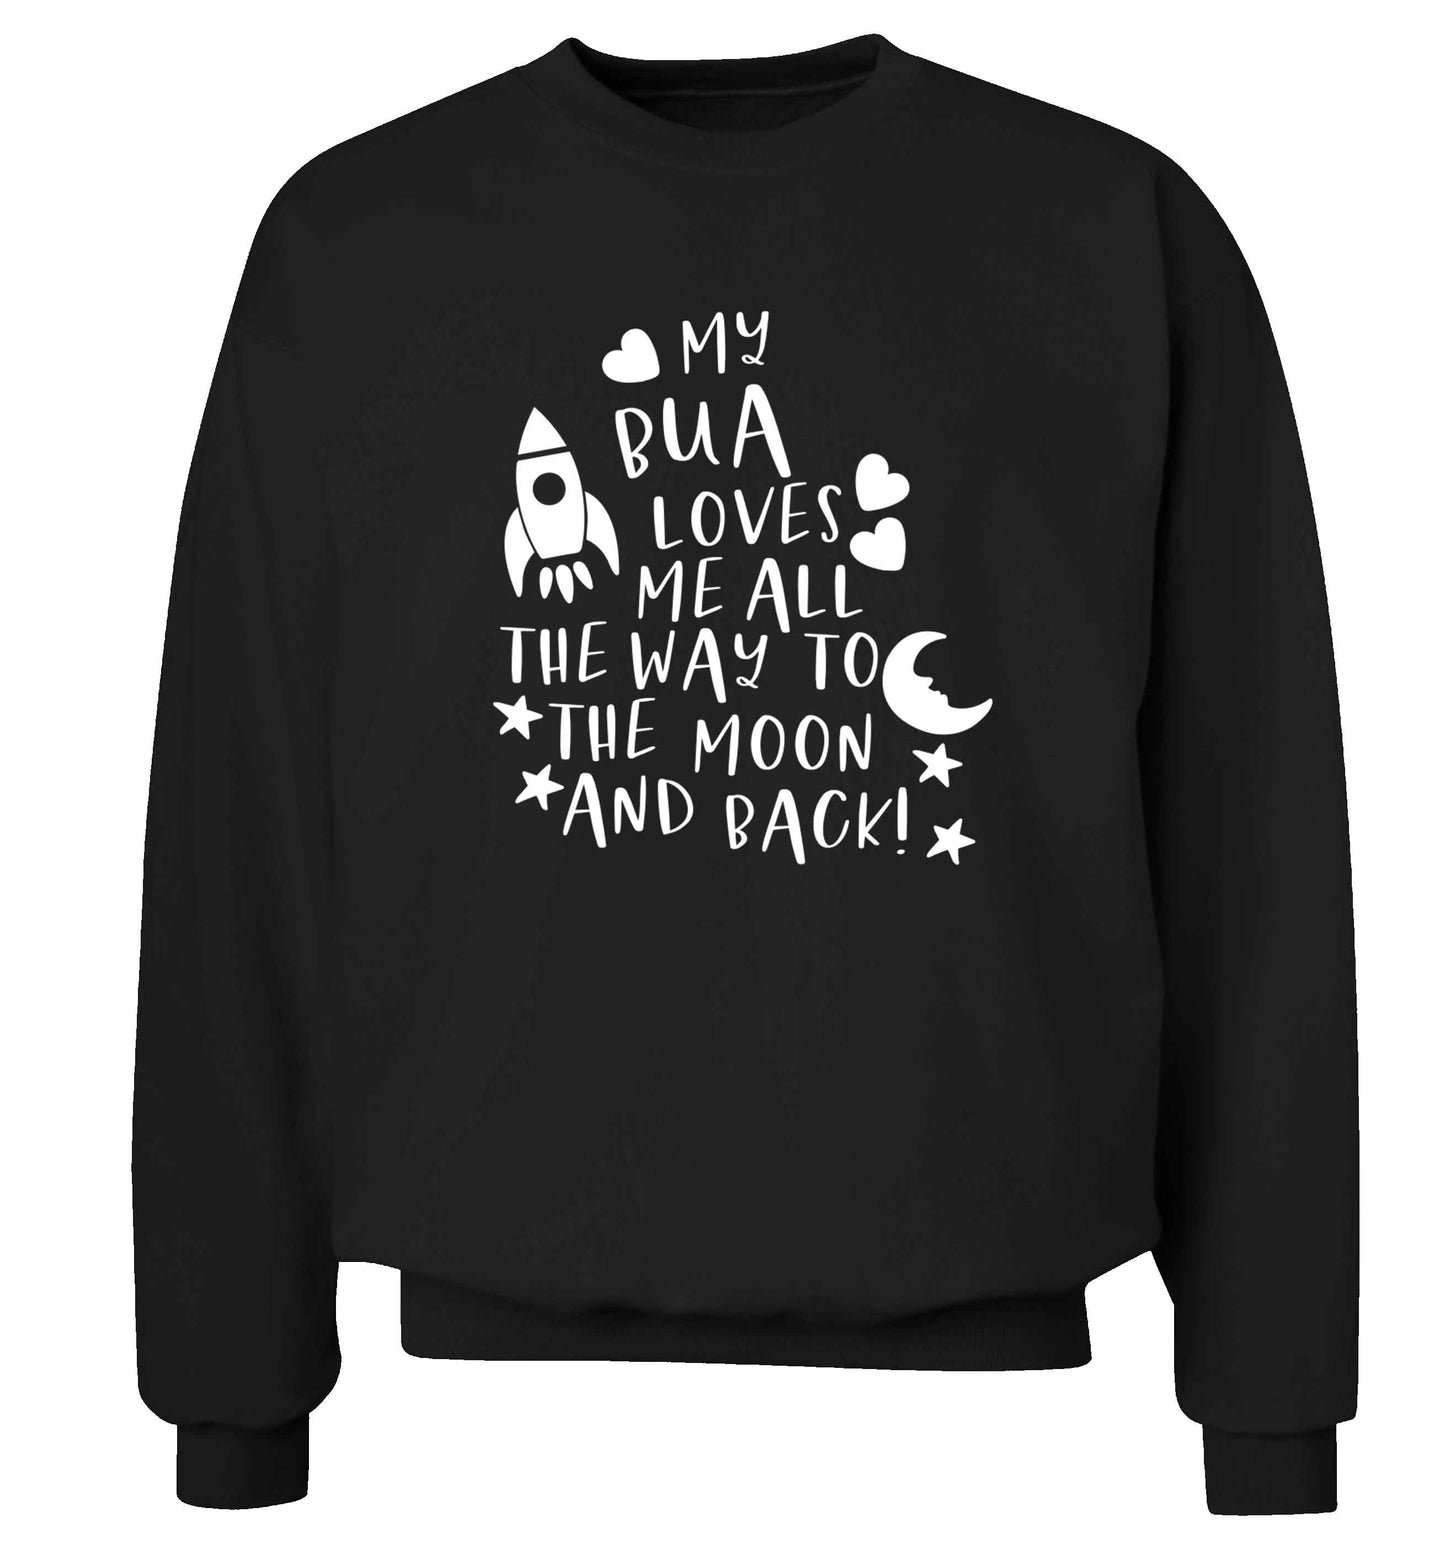 My bua loves me all they way to the moon and back Adult's unisex black Sweater 2XL